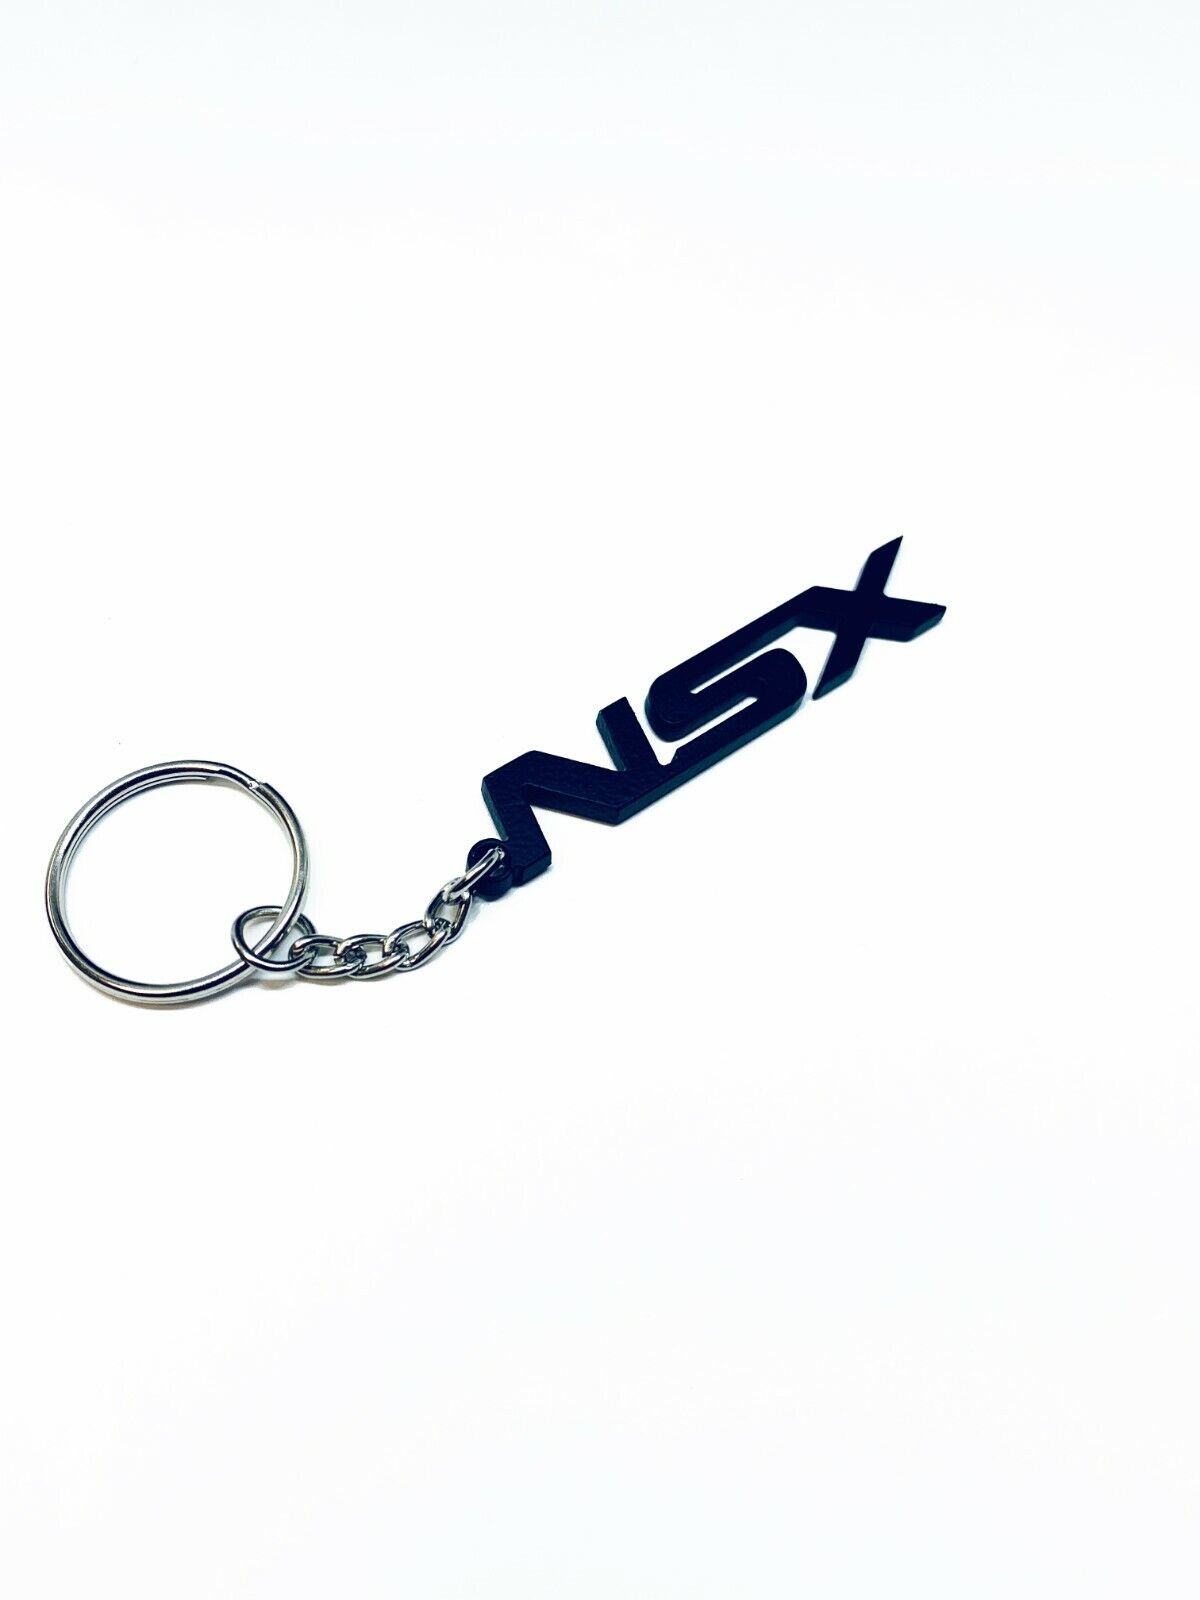 NSX Key Chain for Acura NSX chassis